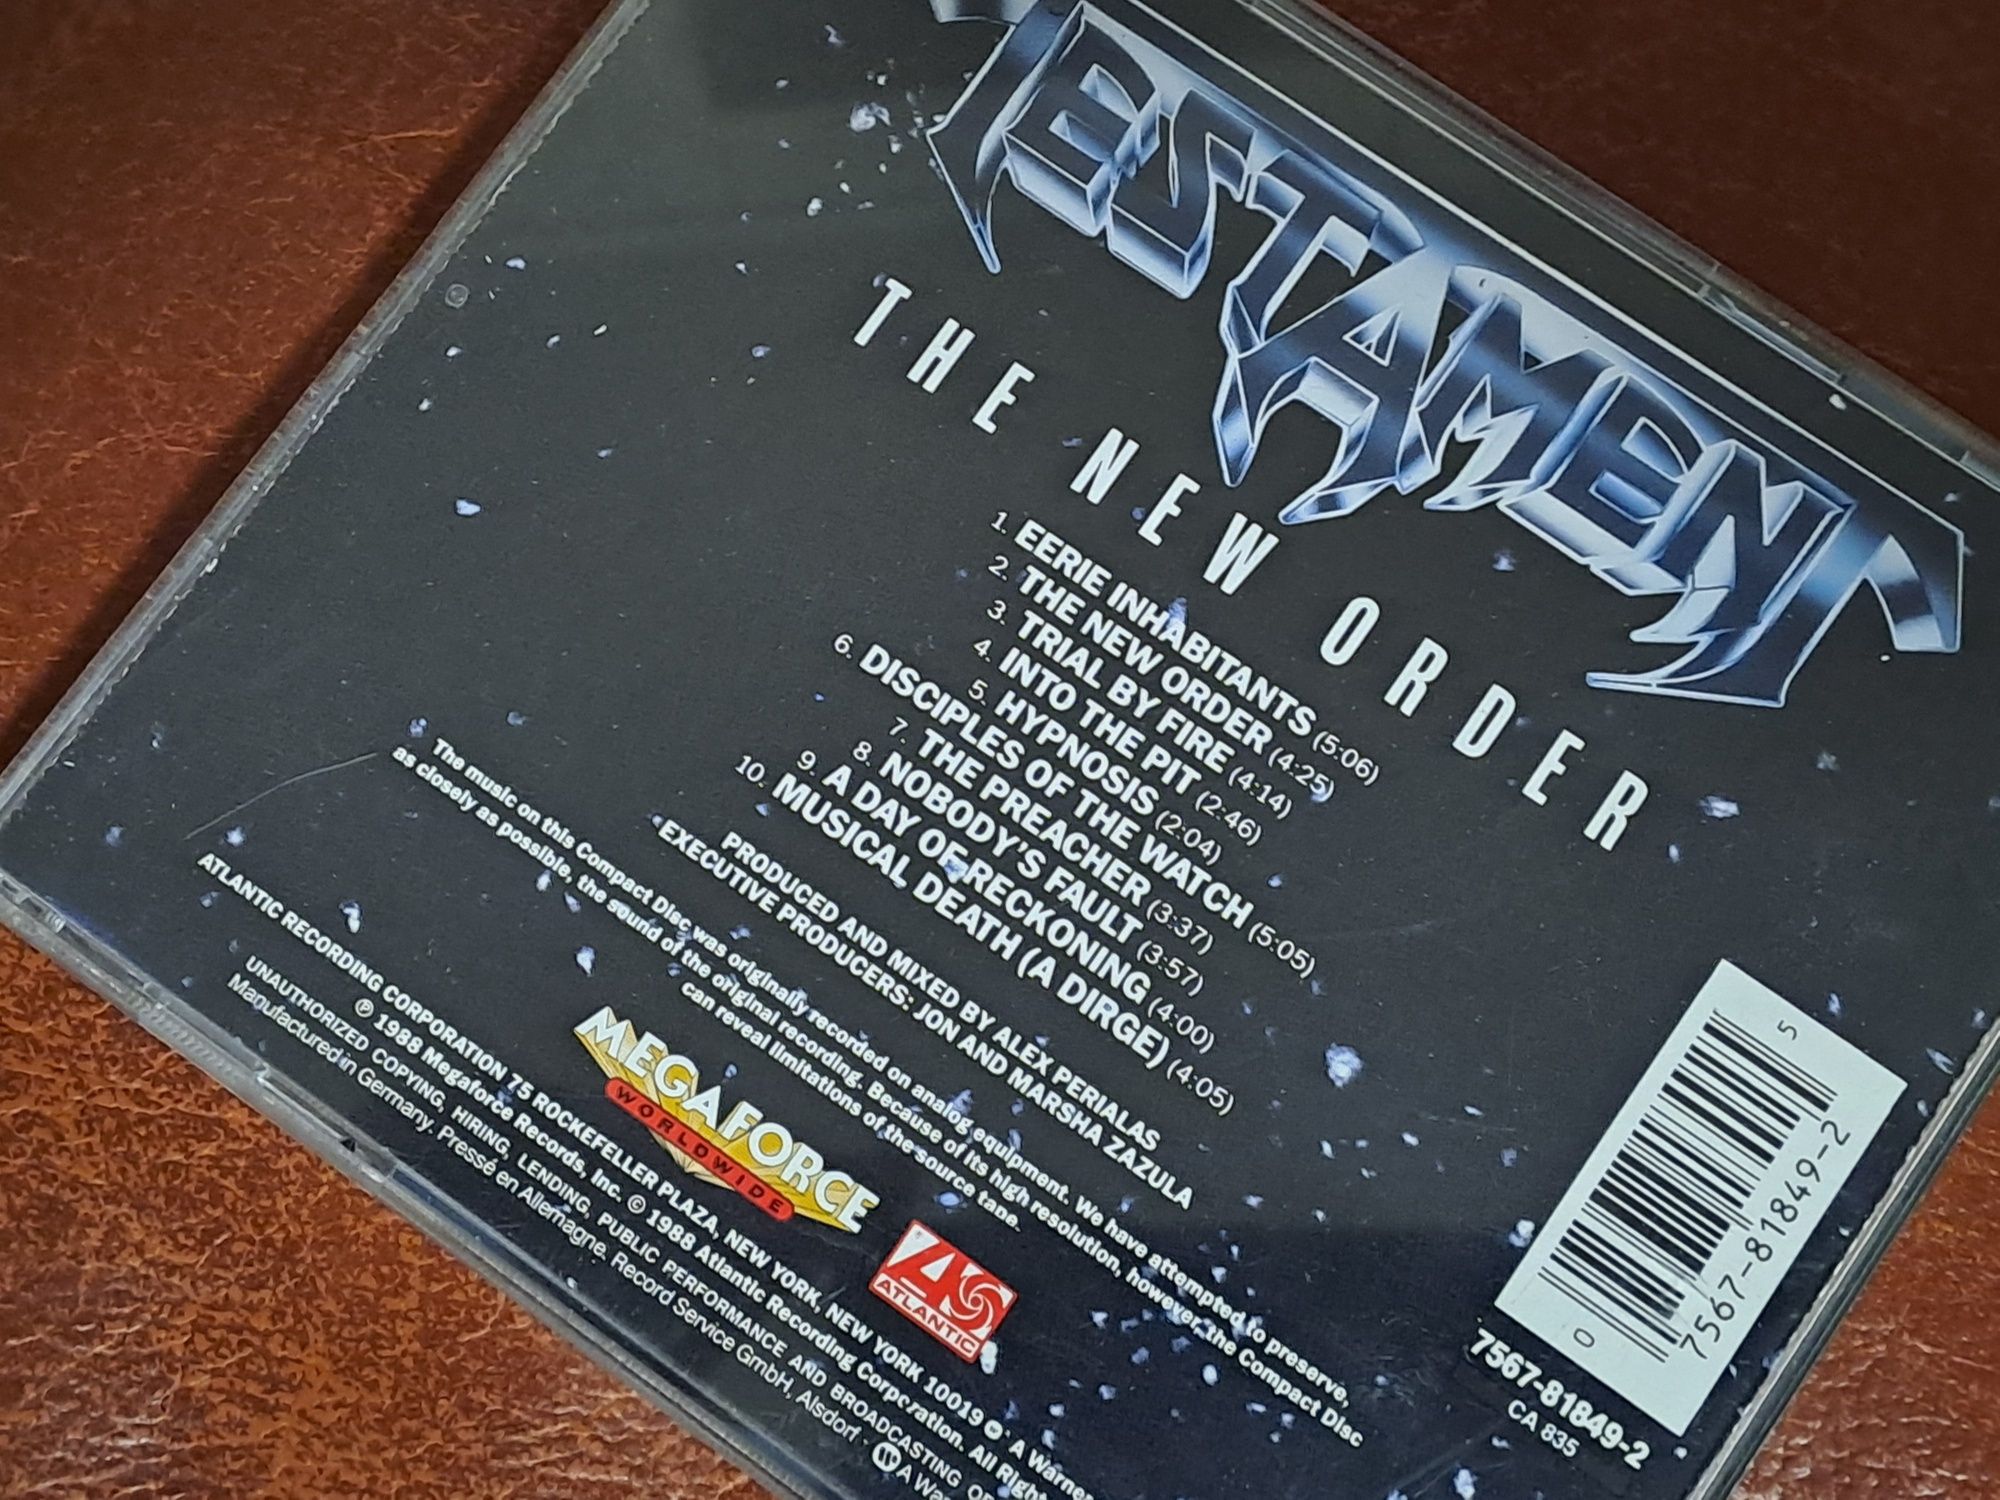 TESTAMENT "The New Order" CD